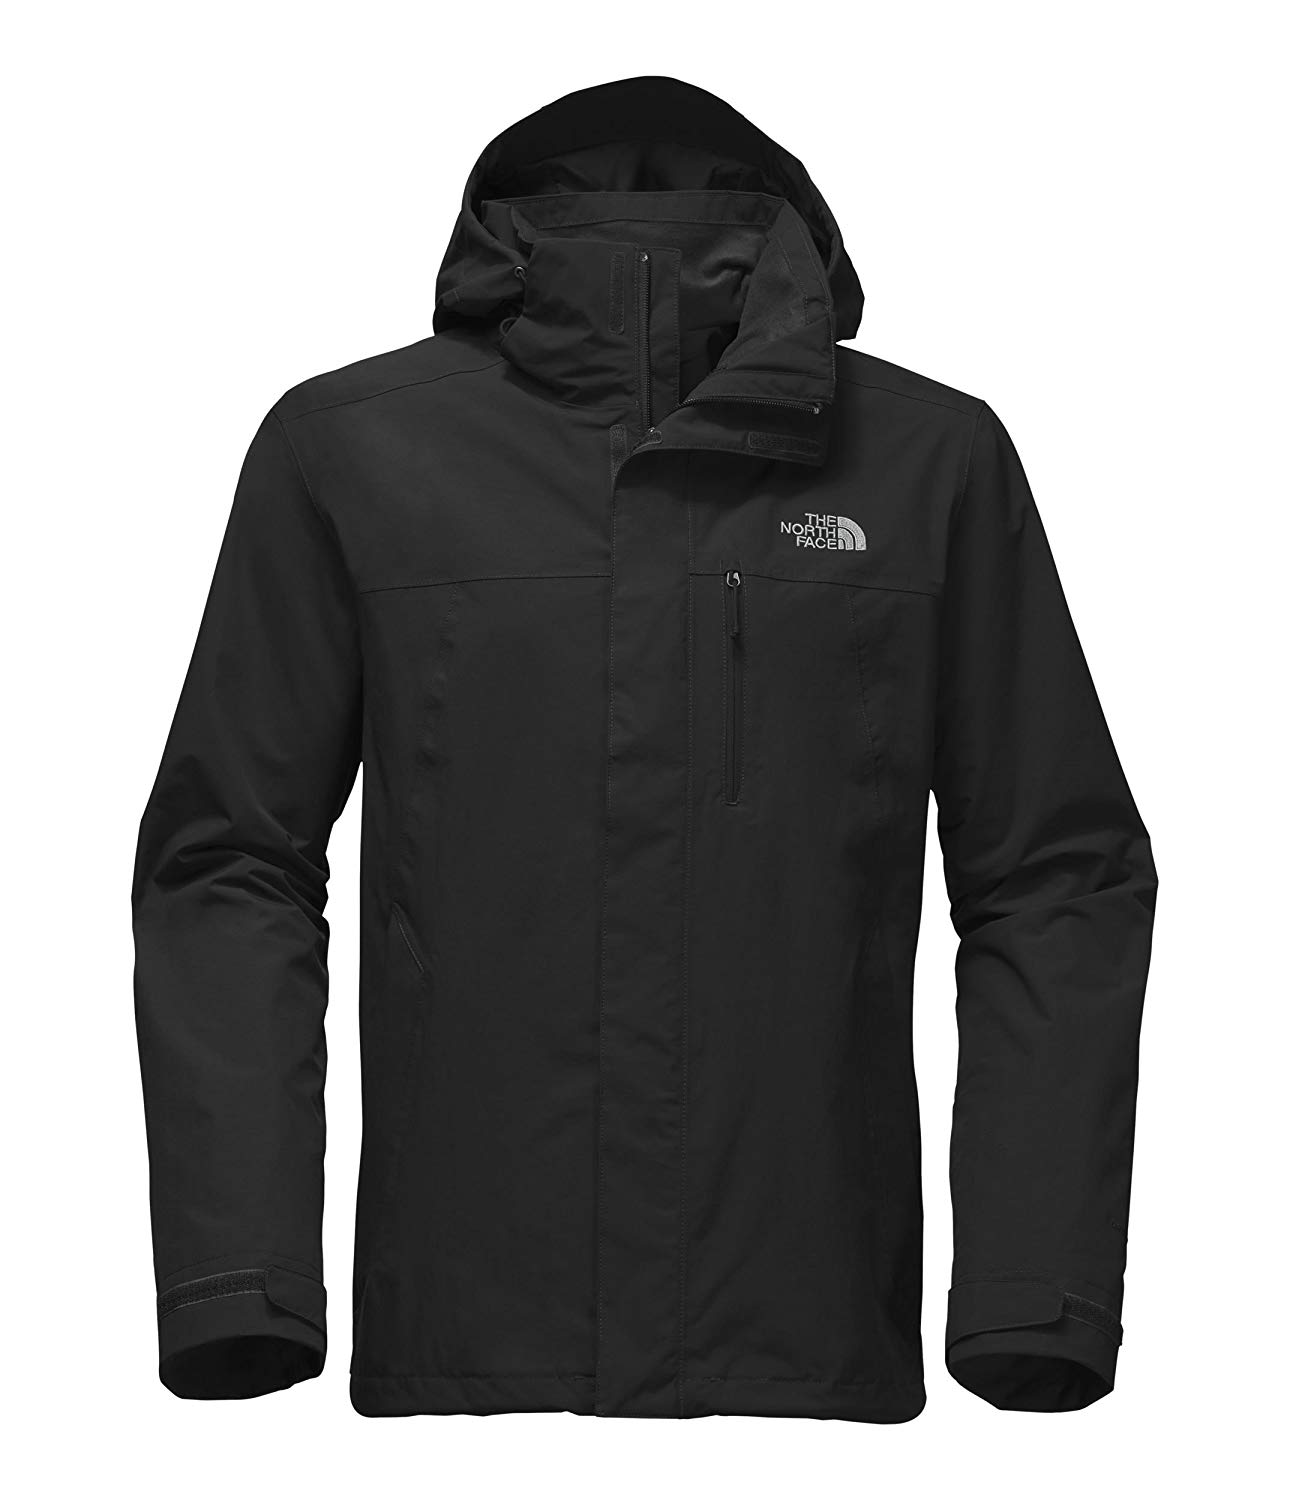 The North Face Men’s Carto Triclimate Jacket The North Face ktmart.vn 3